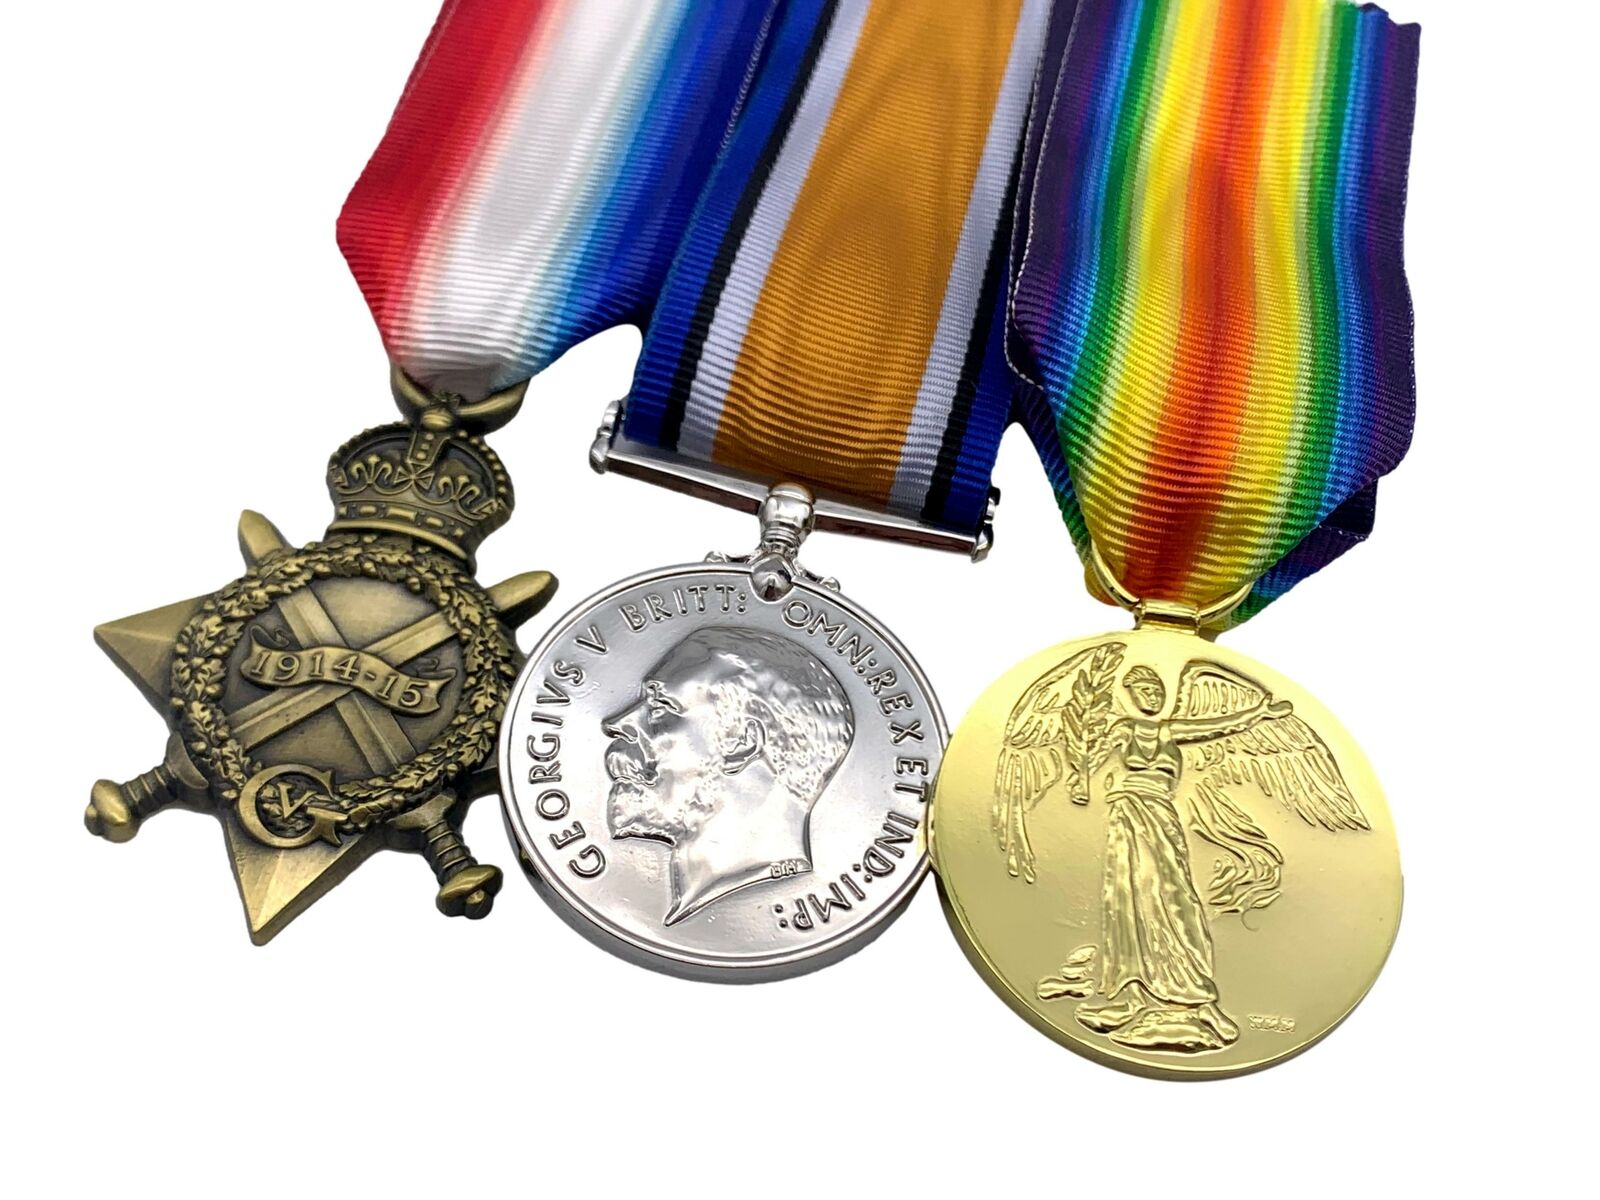 WW1 Medal Trio, 1914/15 Star, British War And Victory Medals, Full Size Replicas